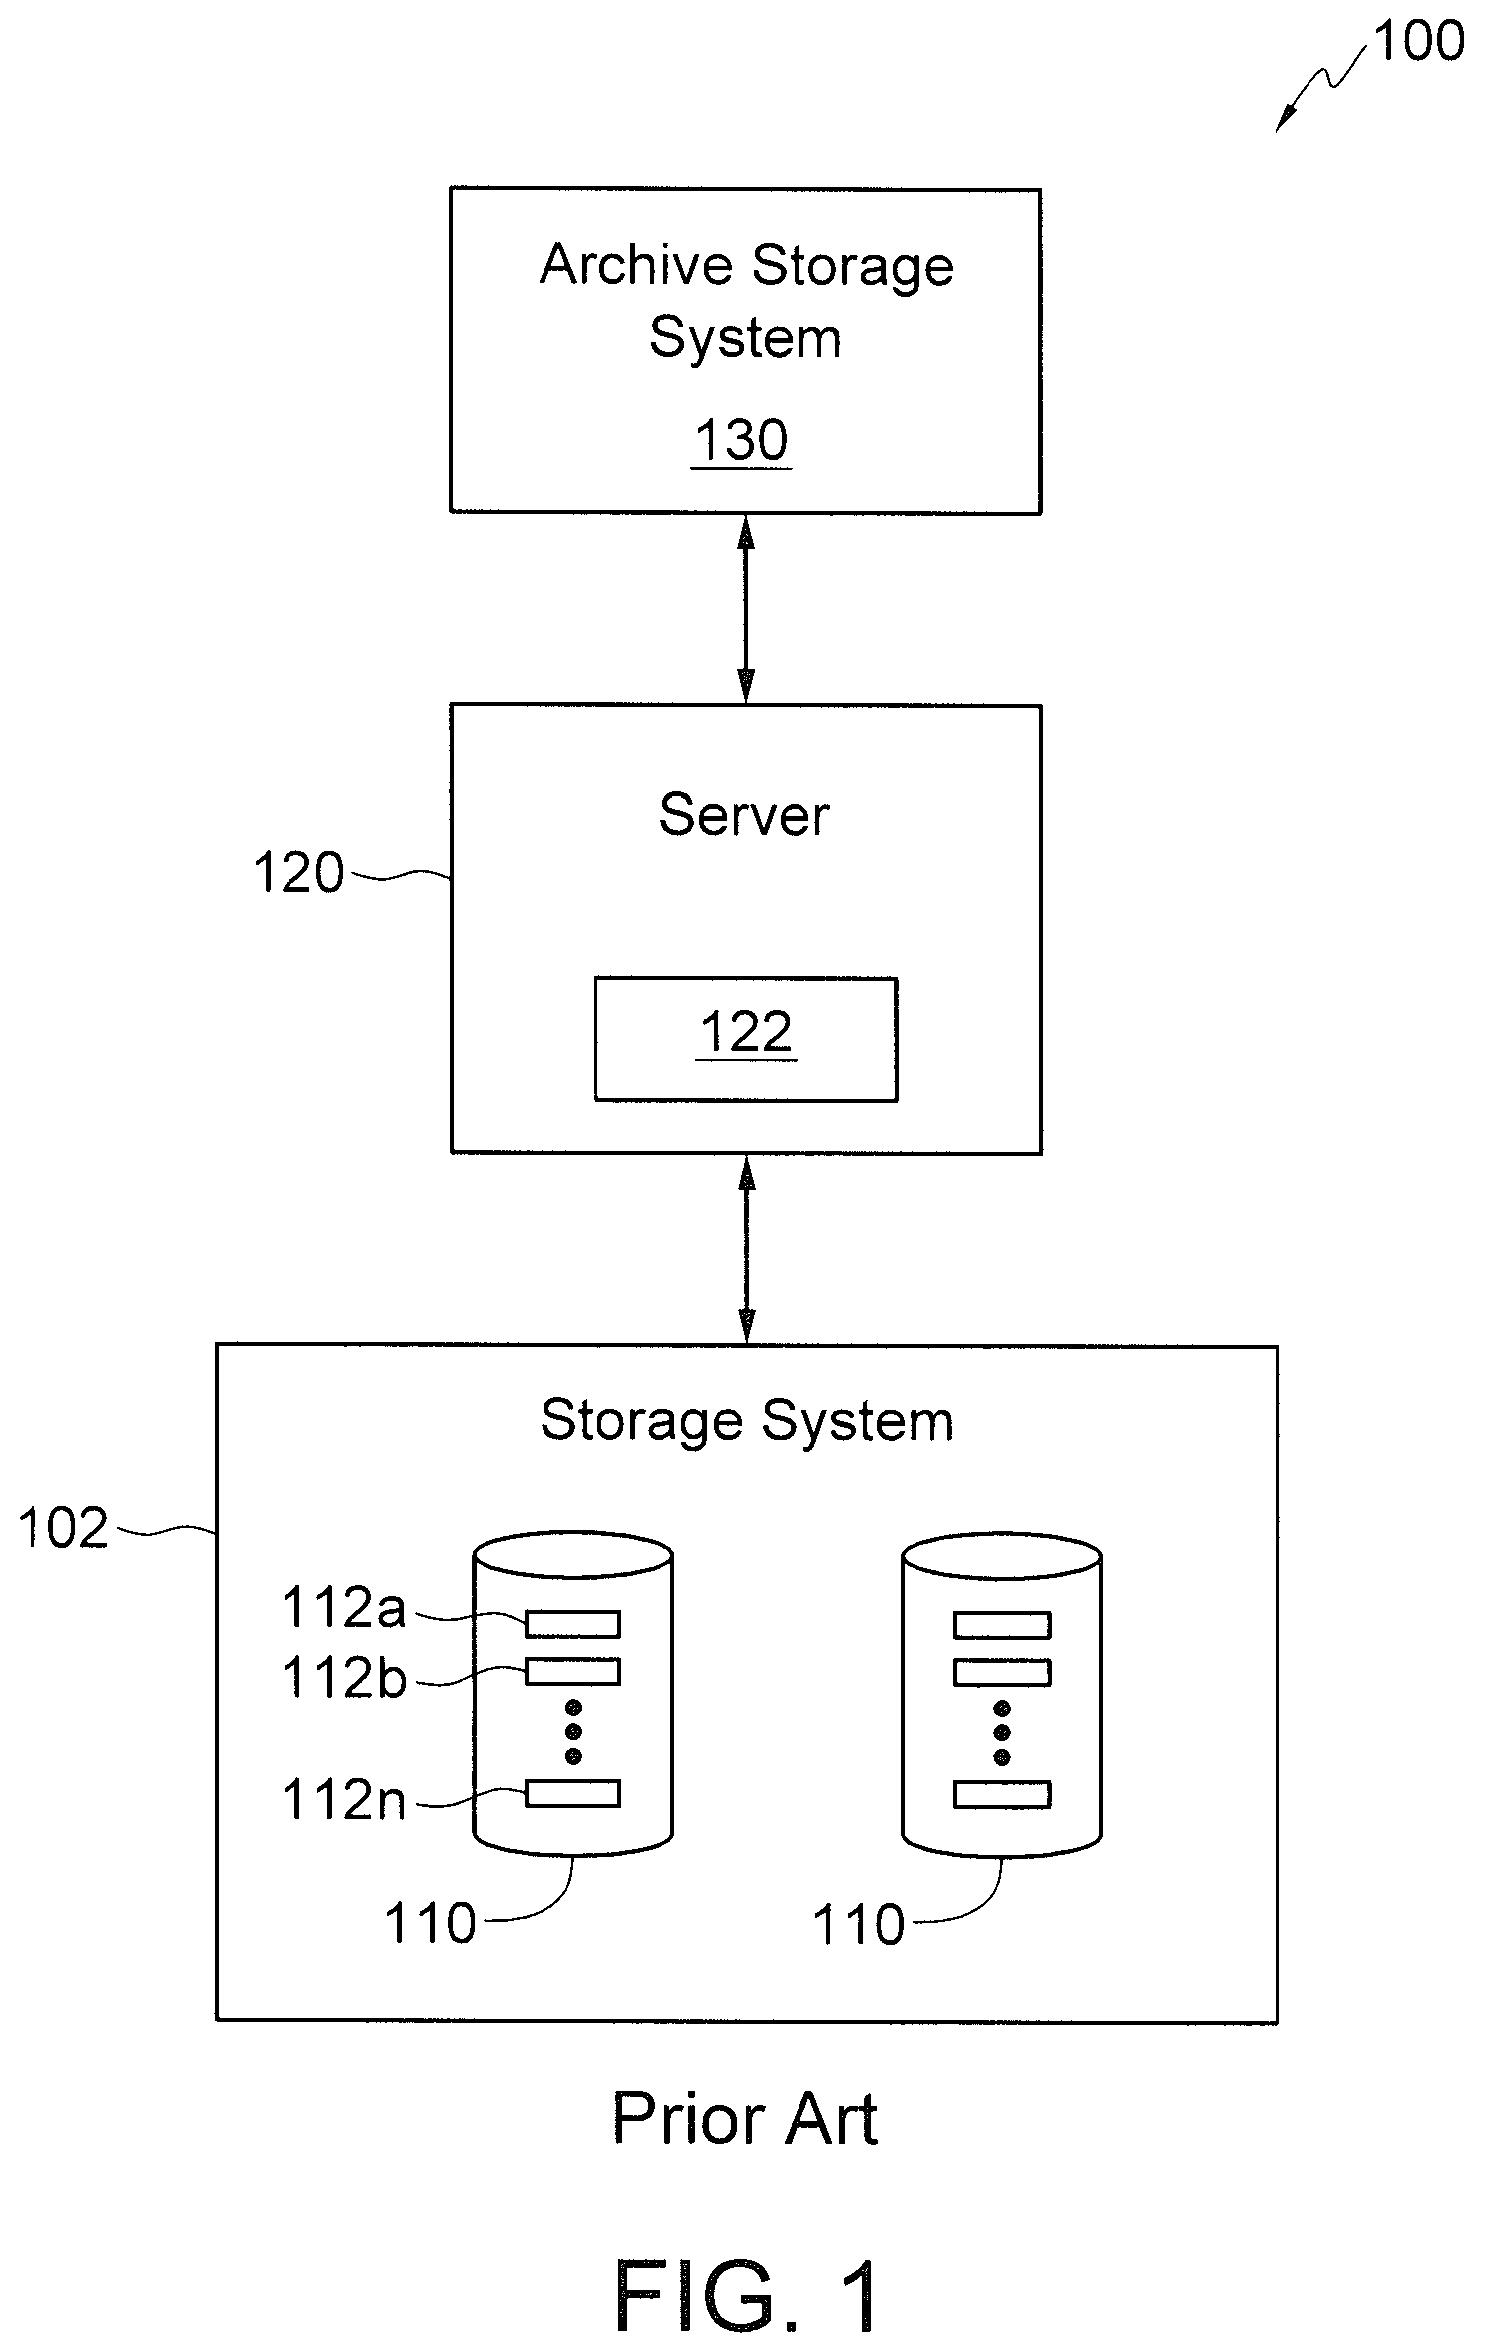 High-availability file archiving